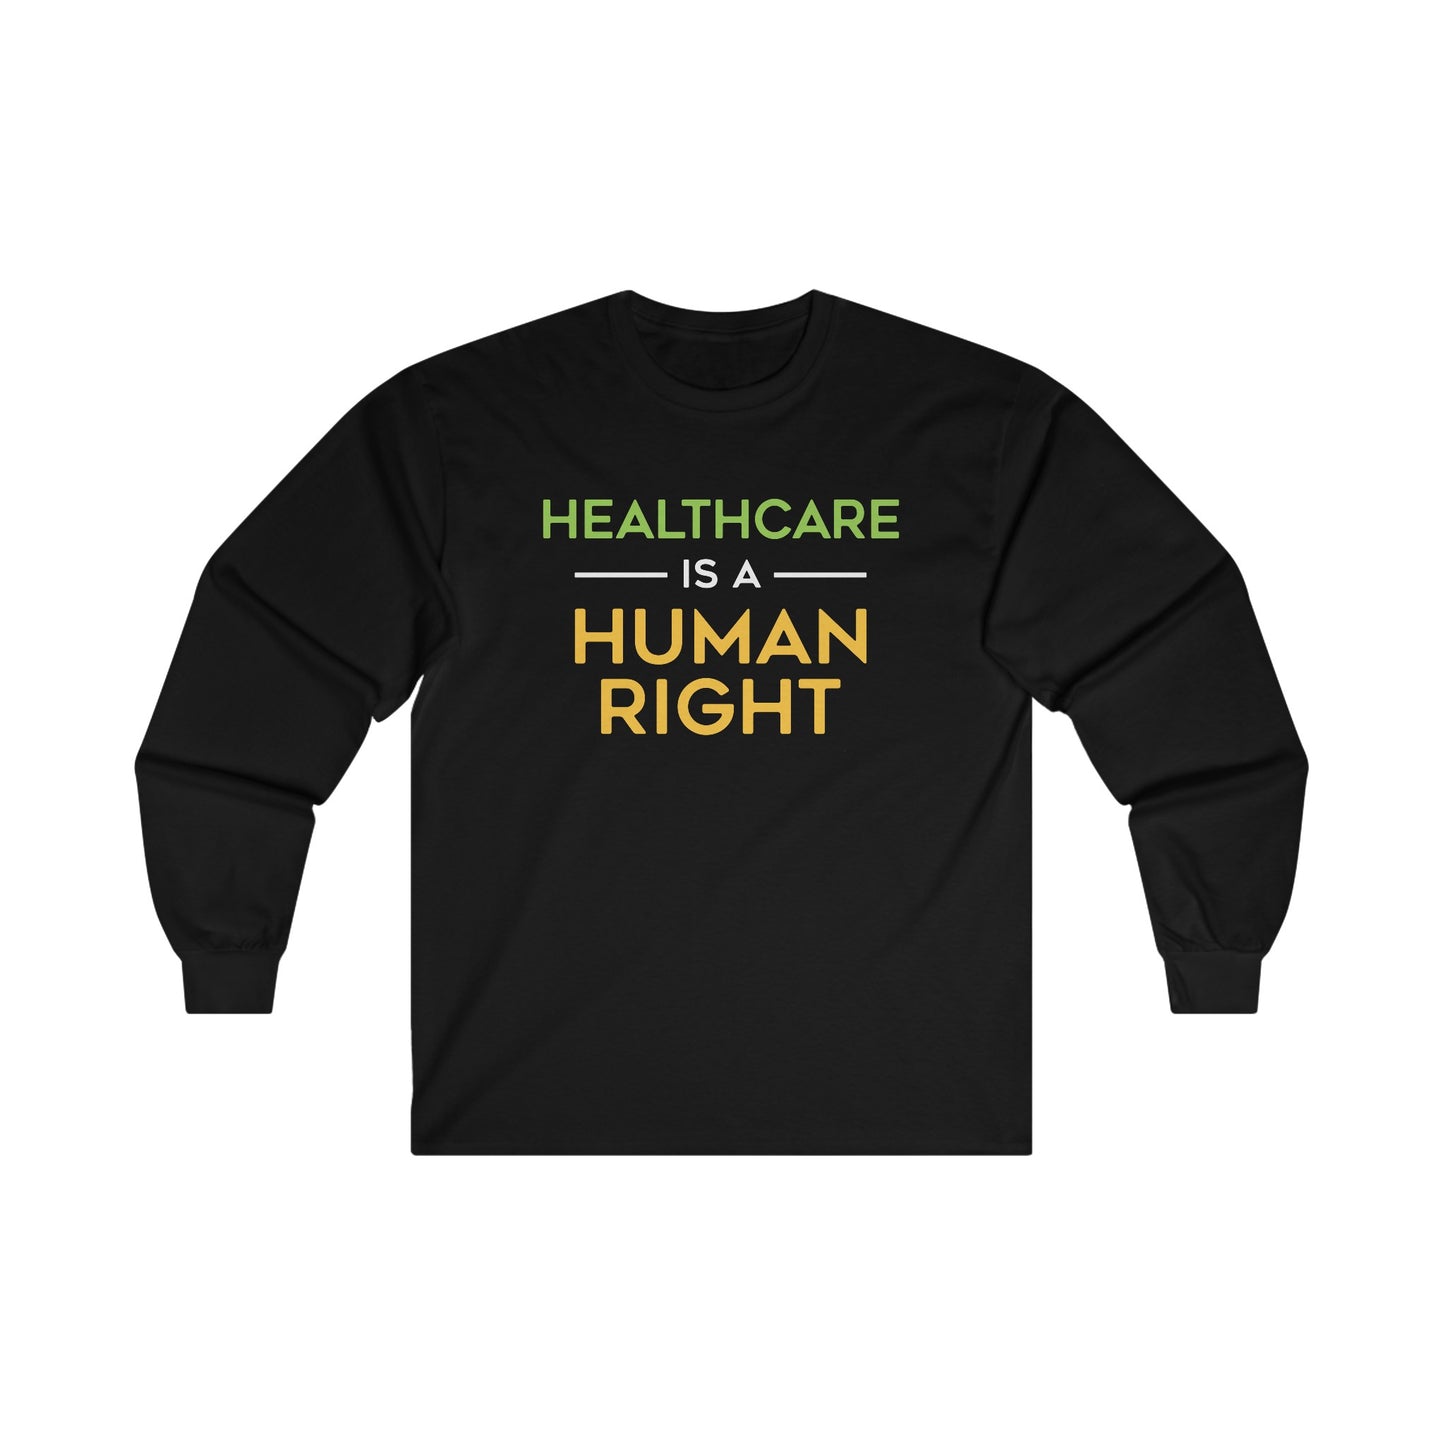 “Healthcare Is A Human Right” Unisex Long Sleeve T-Shirt